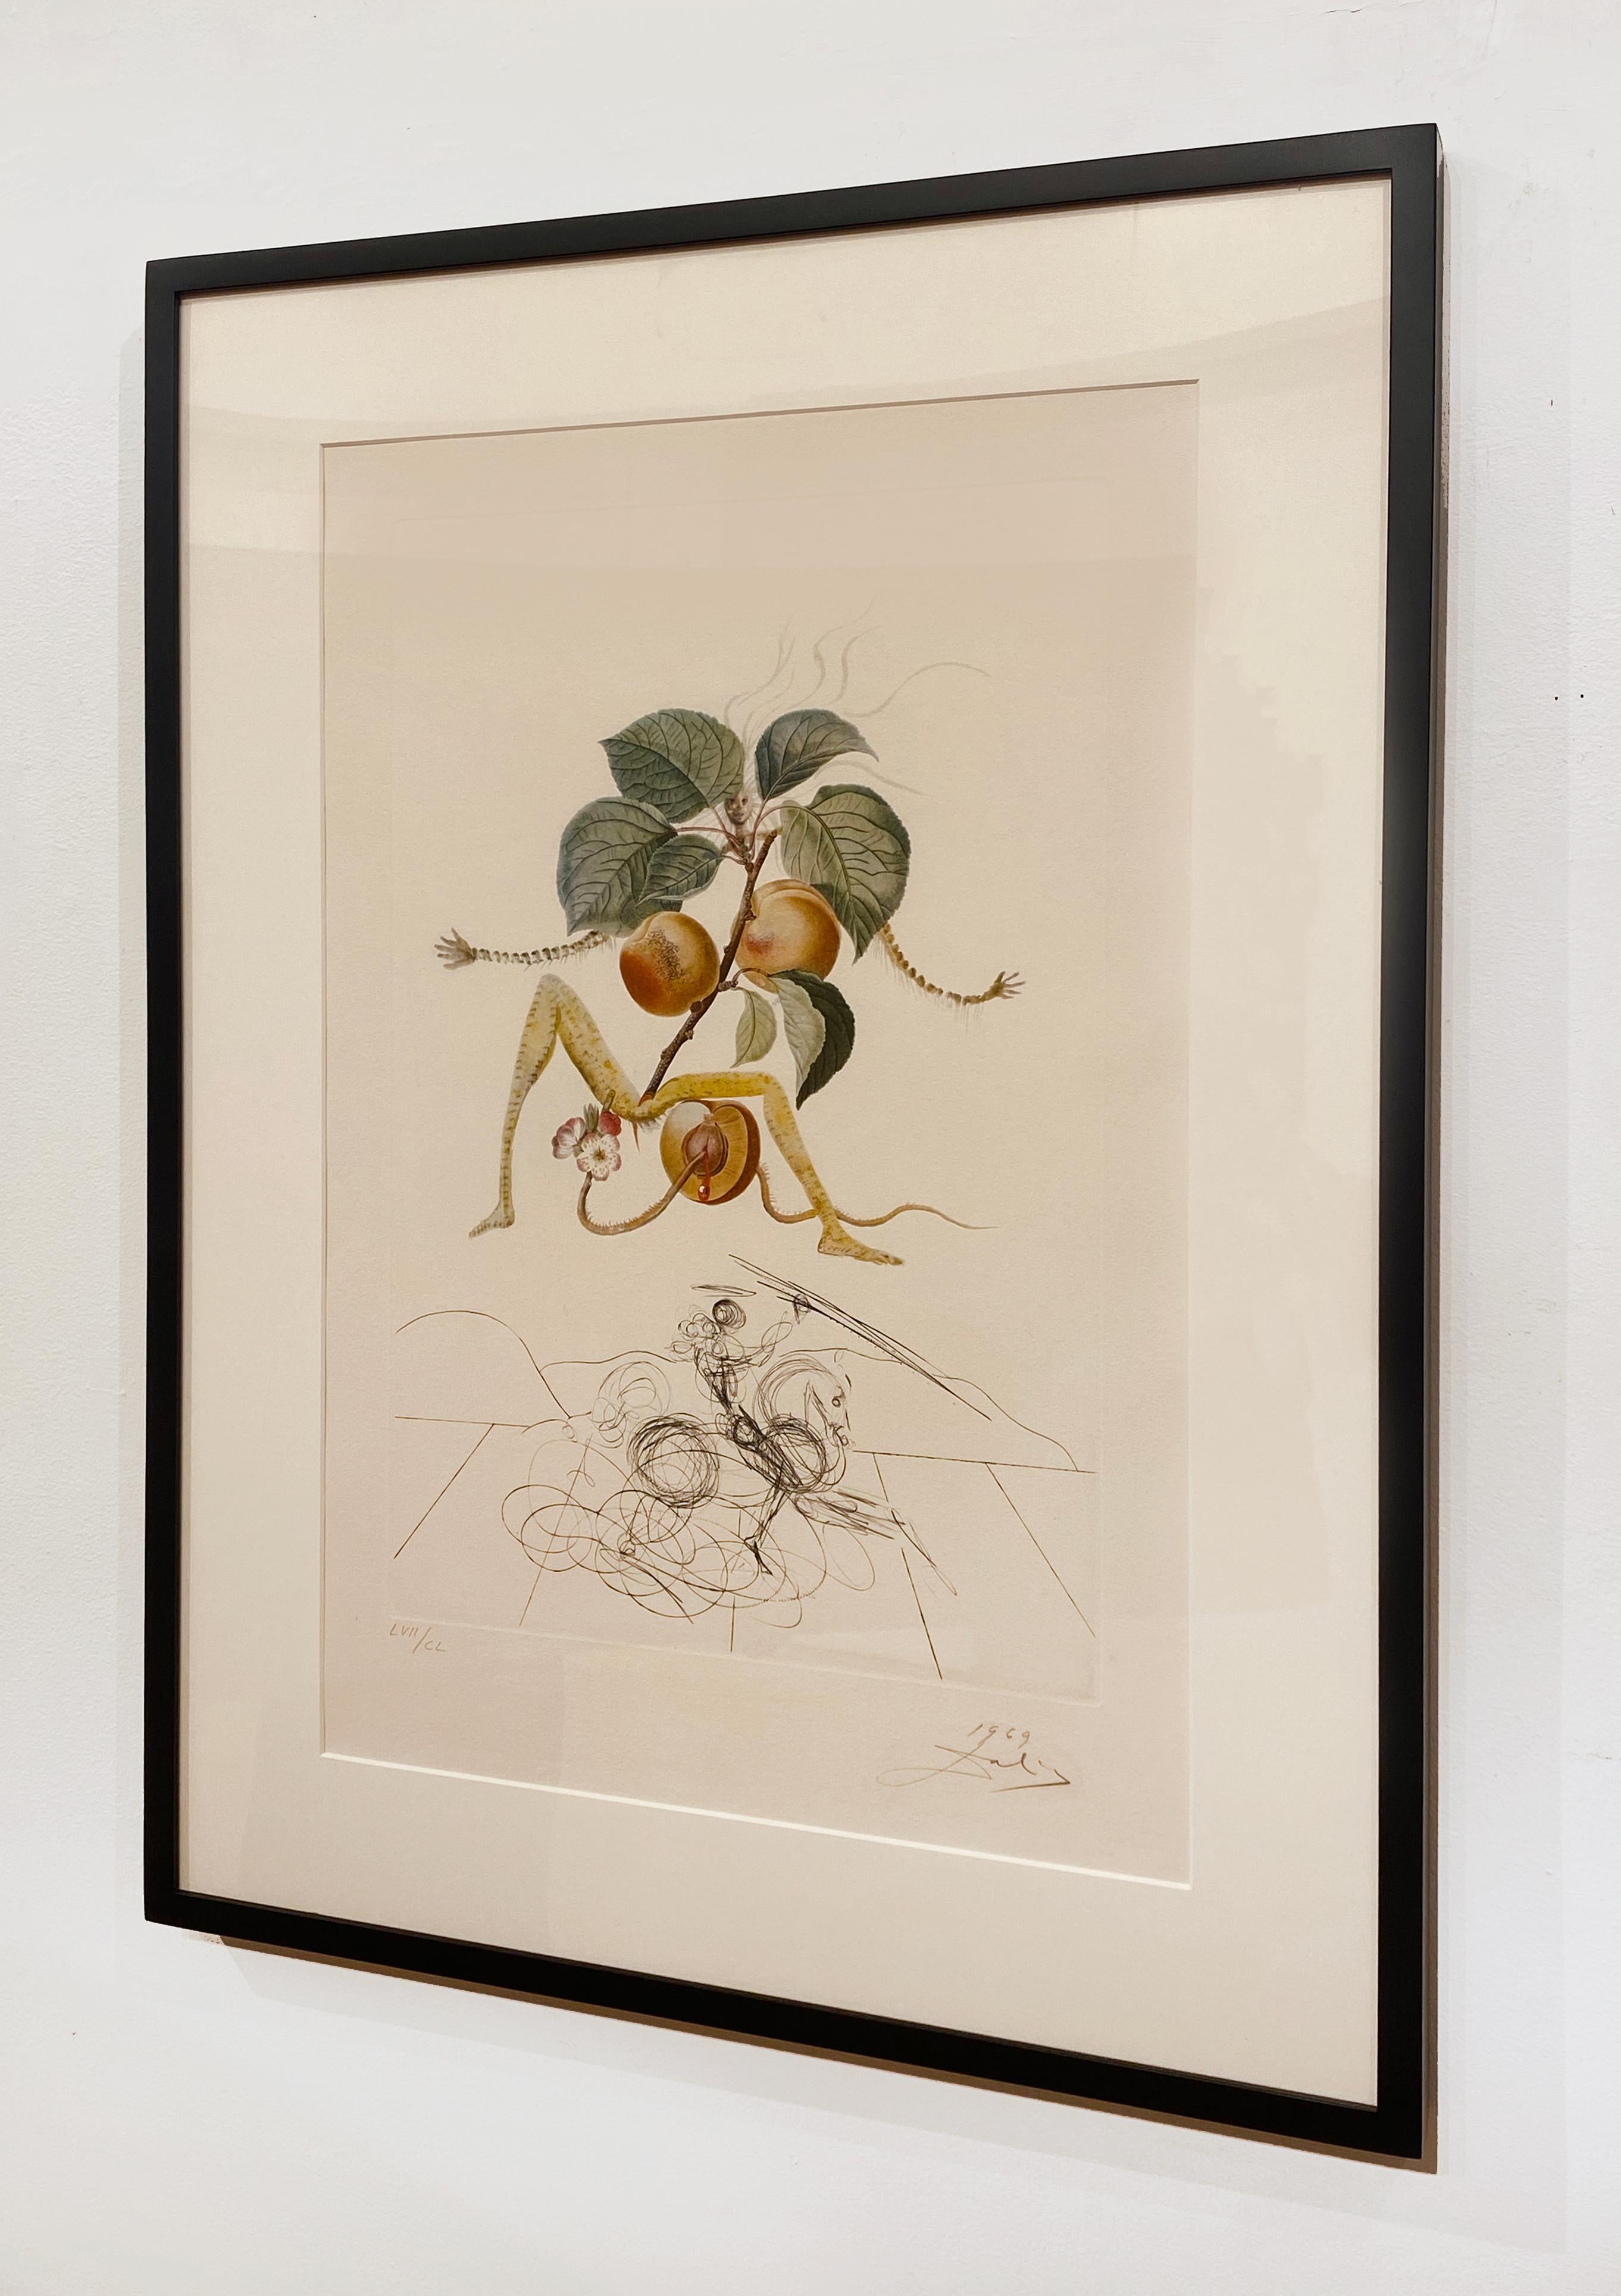 Artist:  Dali, Salvador
Title:  Apricot knight
Series:  Flors Dali (The Fruits)
Date:  1969
Medium:  Lithograph with original drypoint remarques
Unframed Dimensions: 29.92